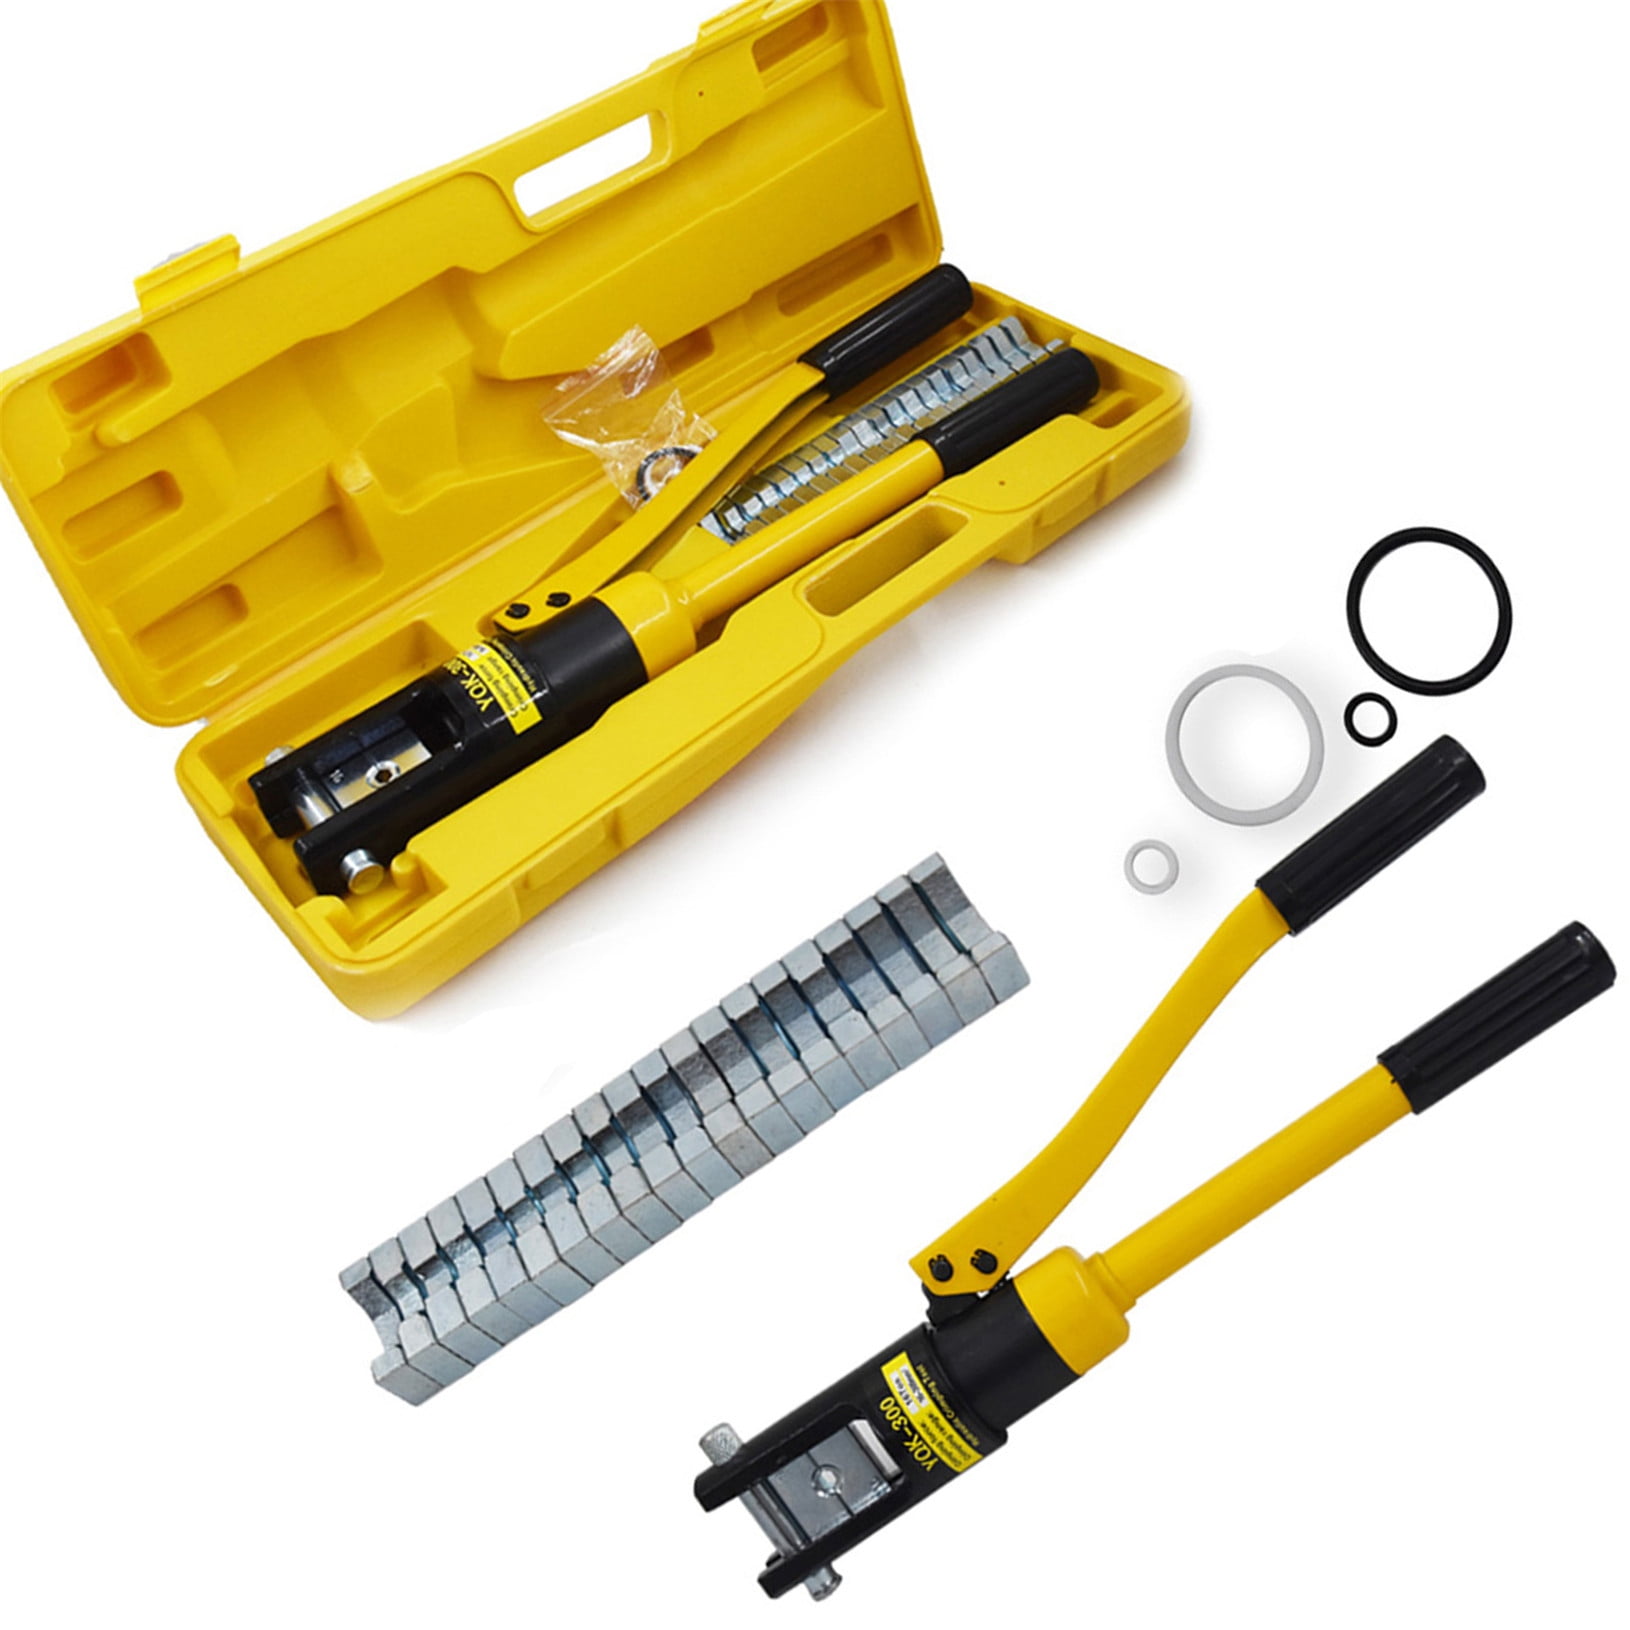 16 Ton Hydraulic Crimper Crimping Tool/11 Dies Wire Battery Cable Lug Terminal 